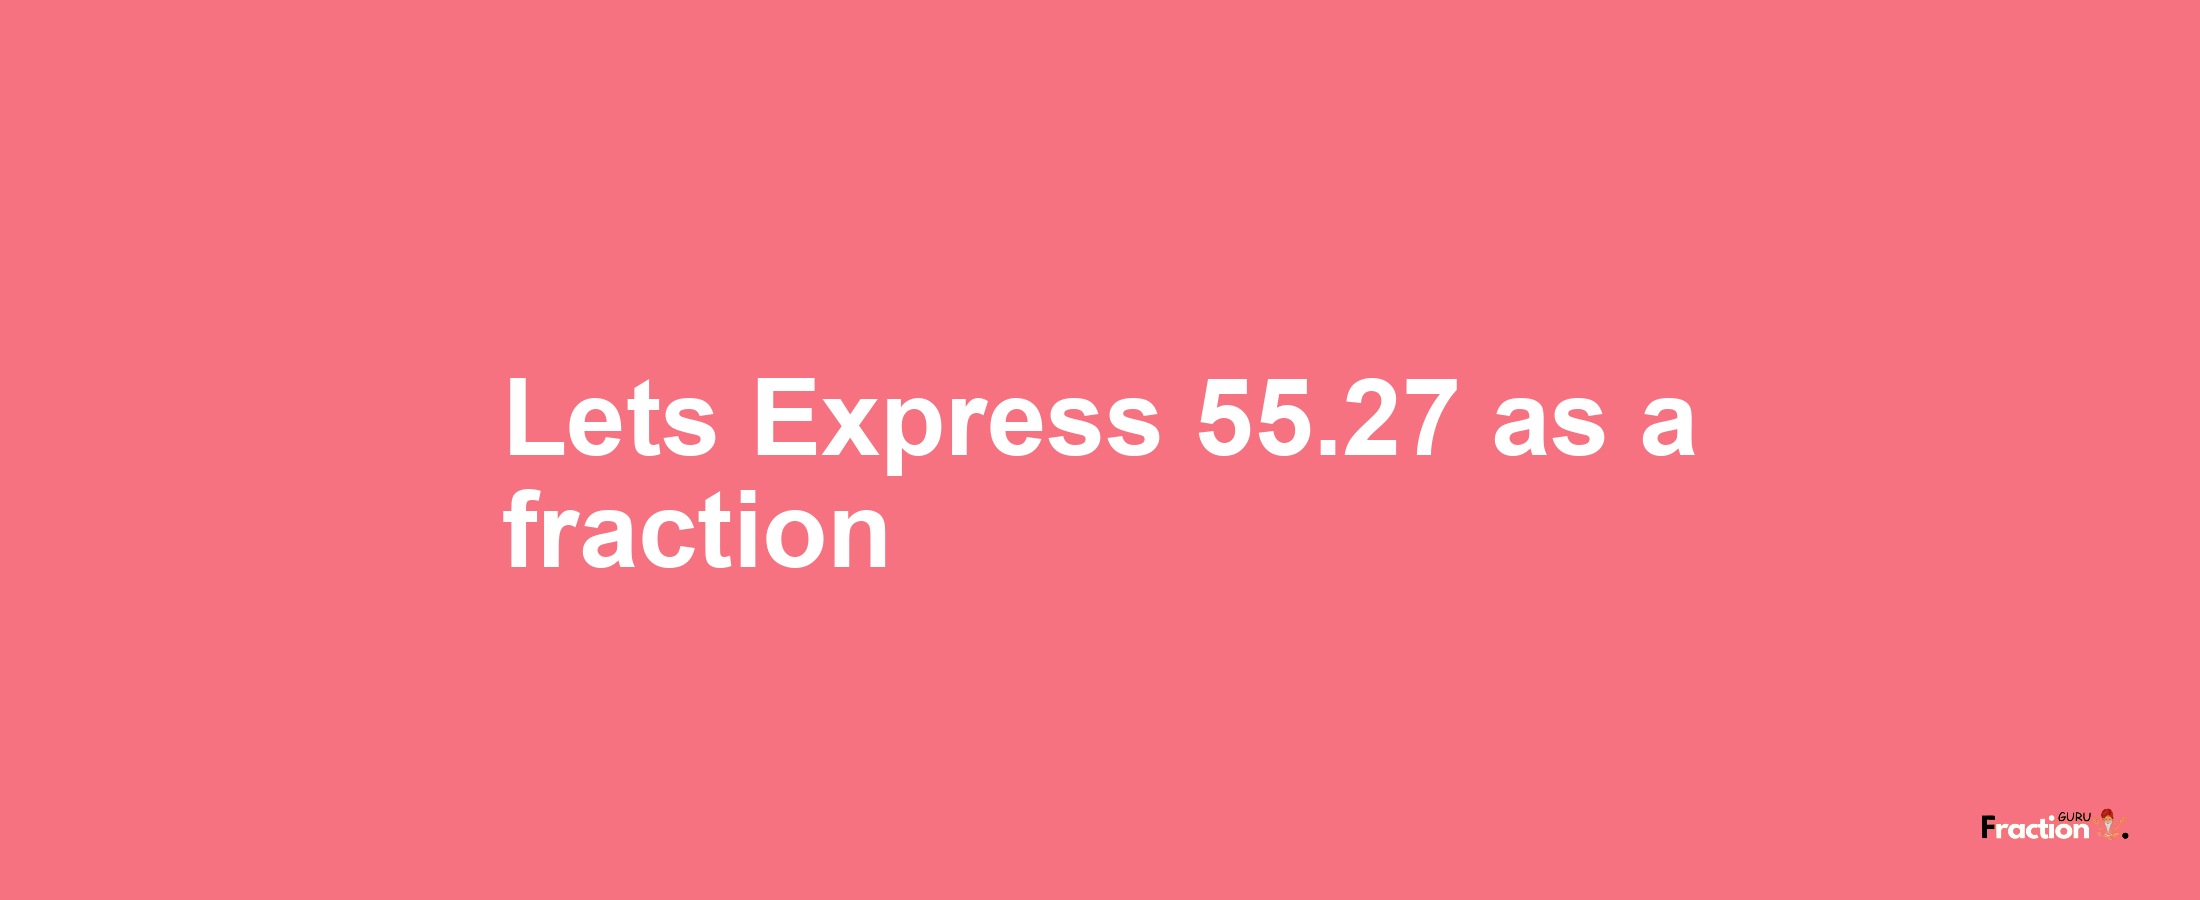 Lets Express 55.27 as afraction